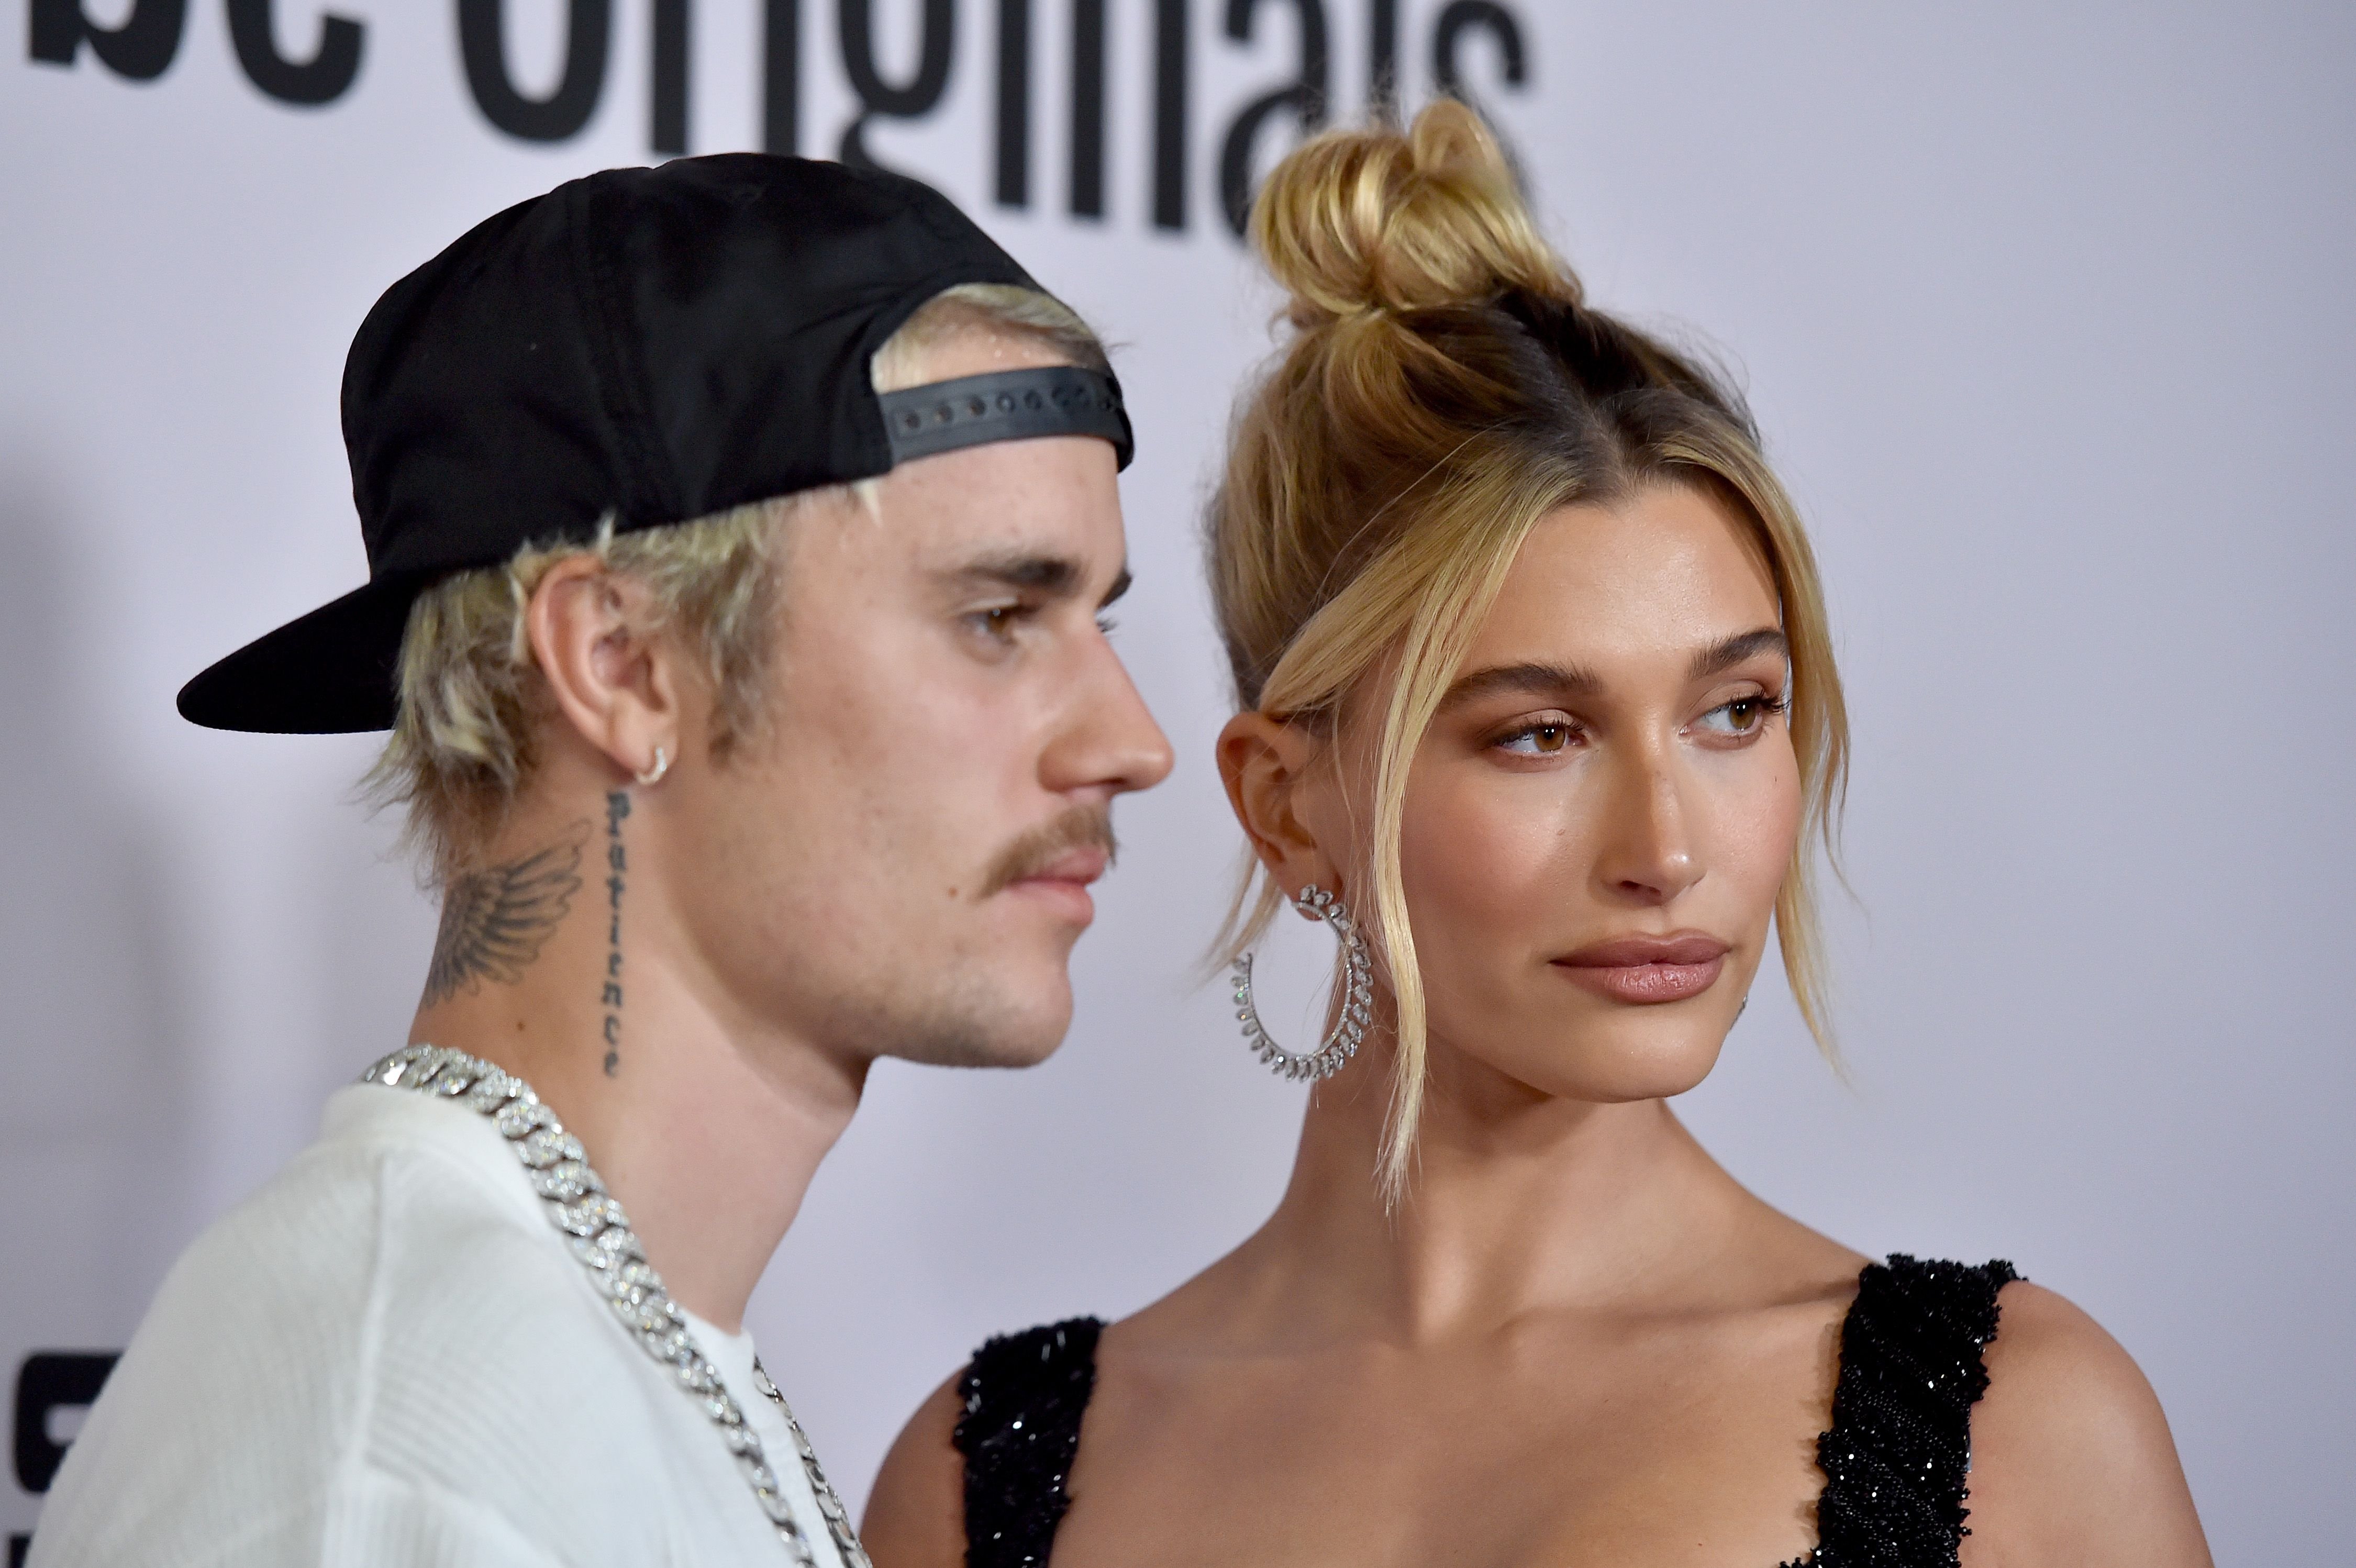 Justin Bieber and Hailey Bieber at the Premiere of YouTube Original's "Justin Bieber: Seasons" on January 27, 2020 in Los Angeles, California. | Getty Images